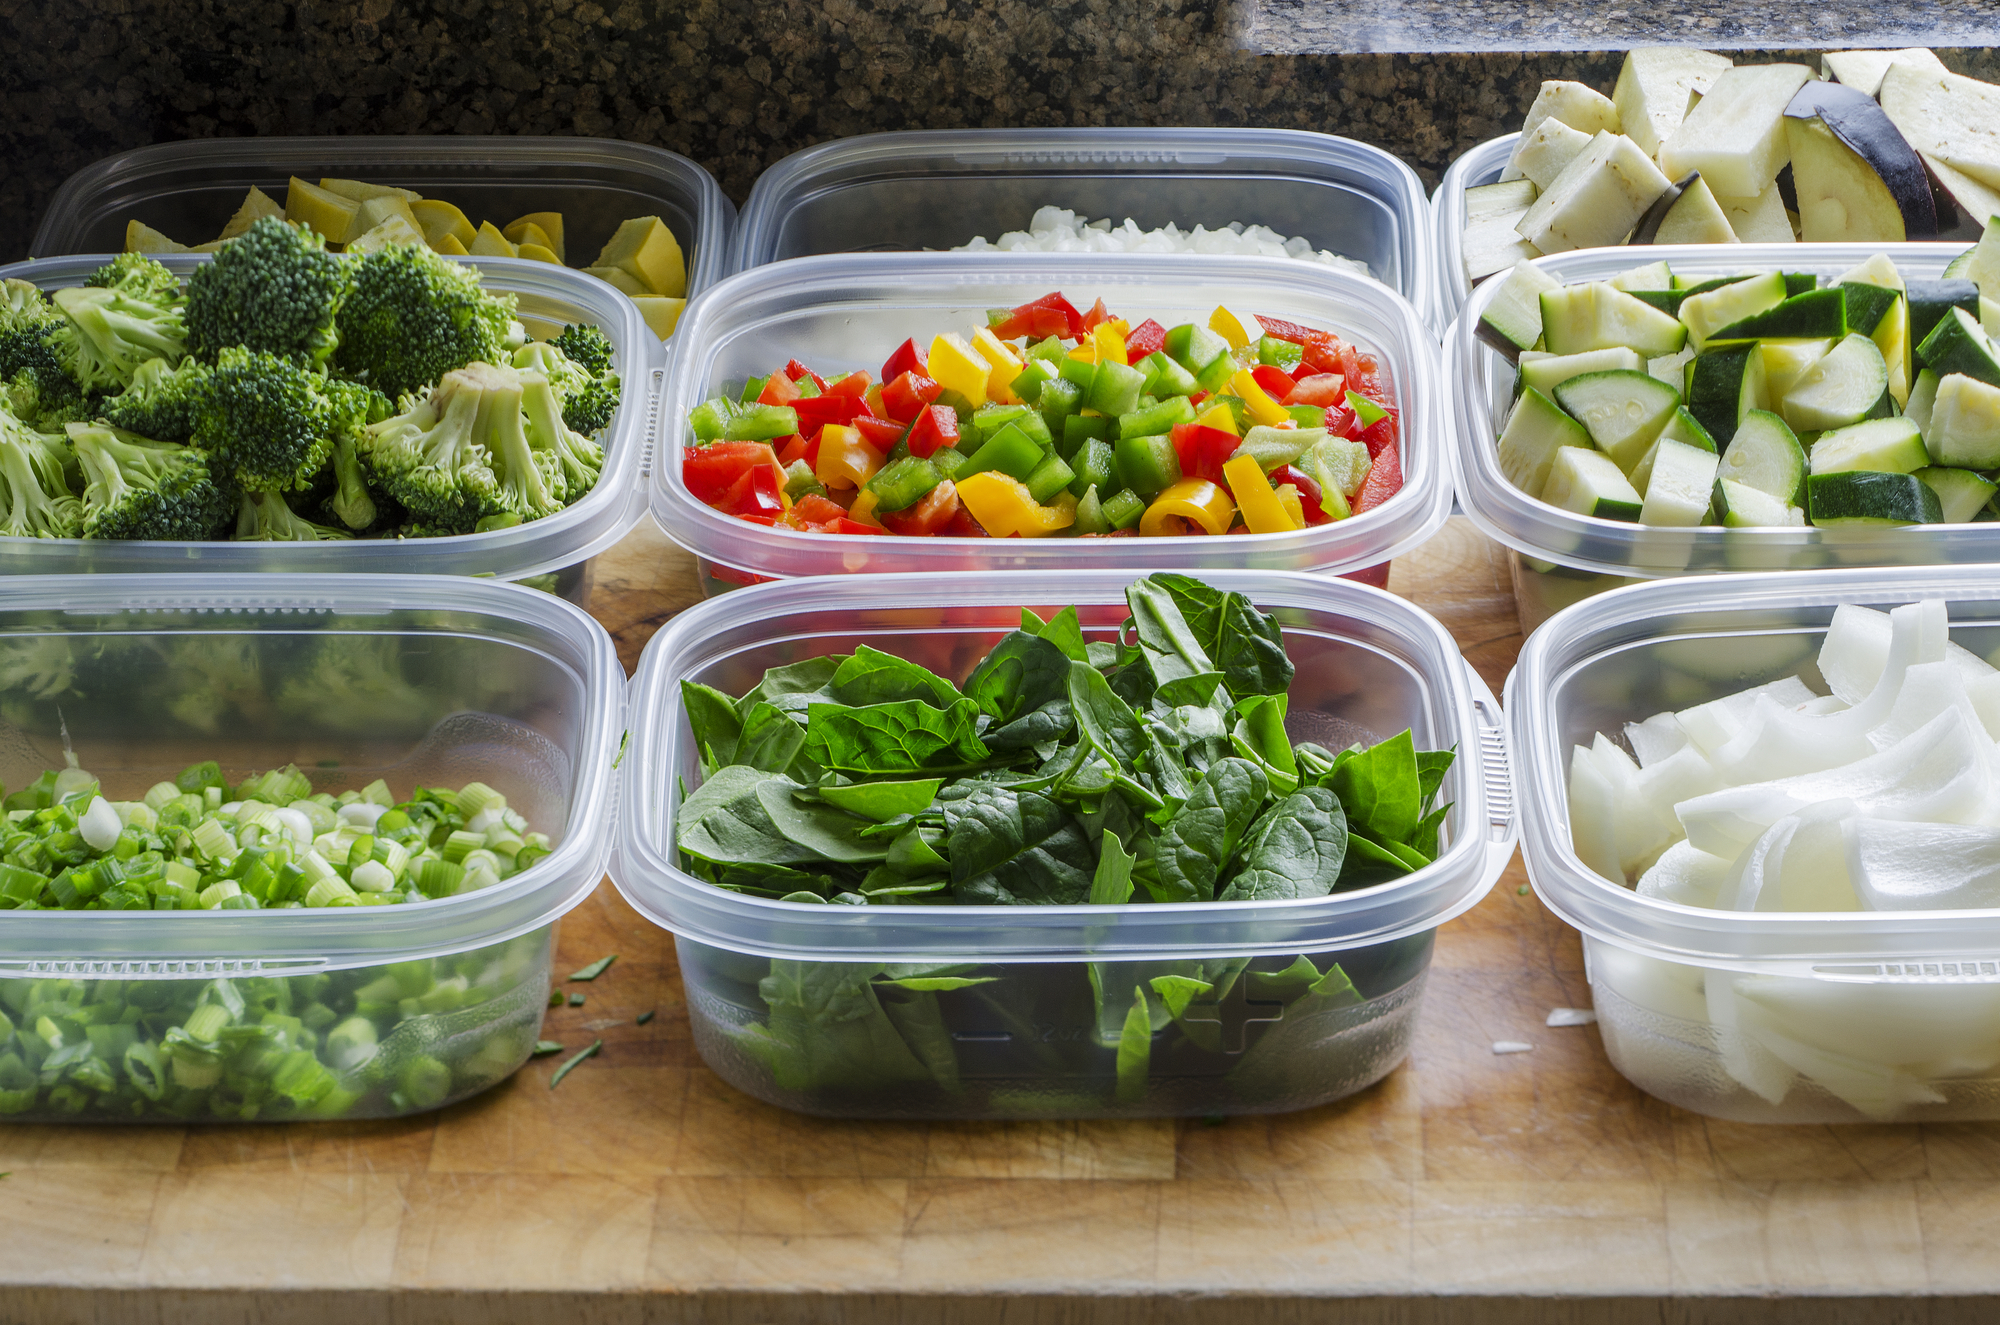 Chopped vegetables in reusable containers